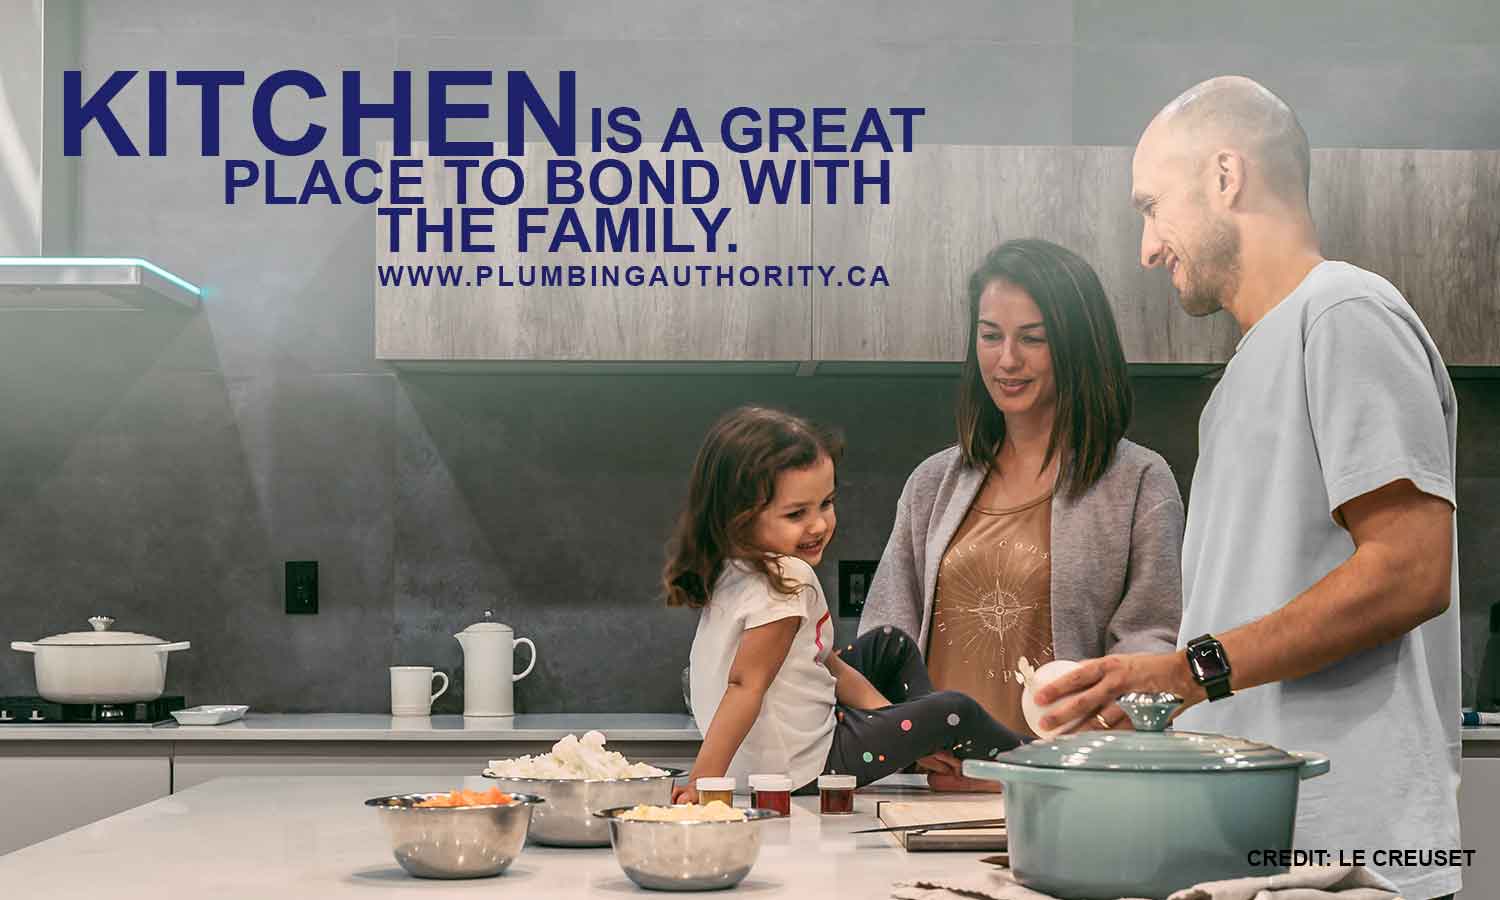 Kitchen is a great place to bond with the family.